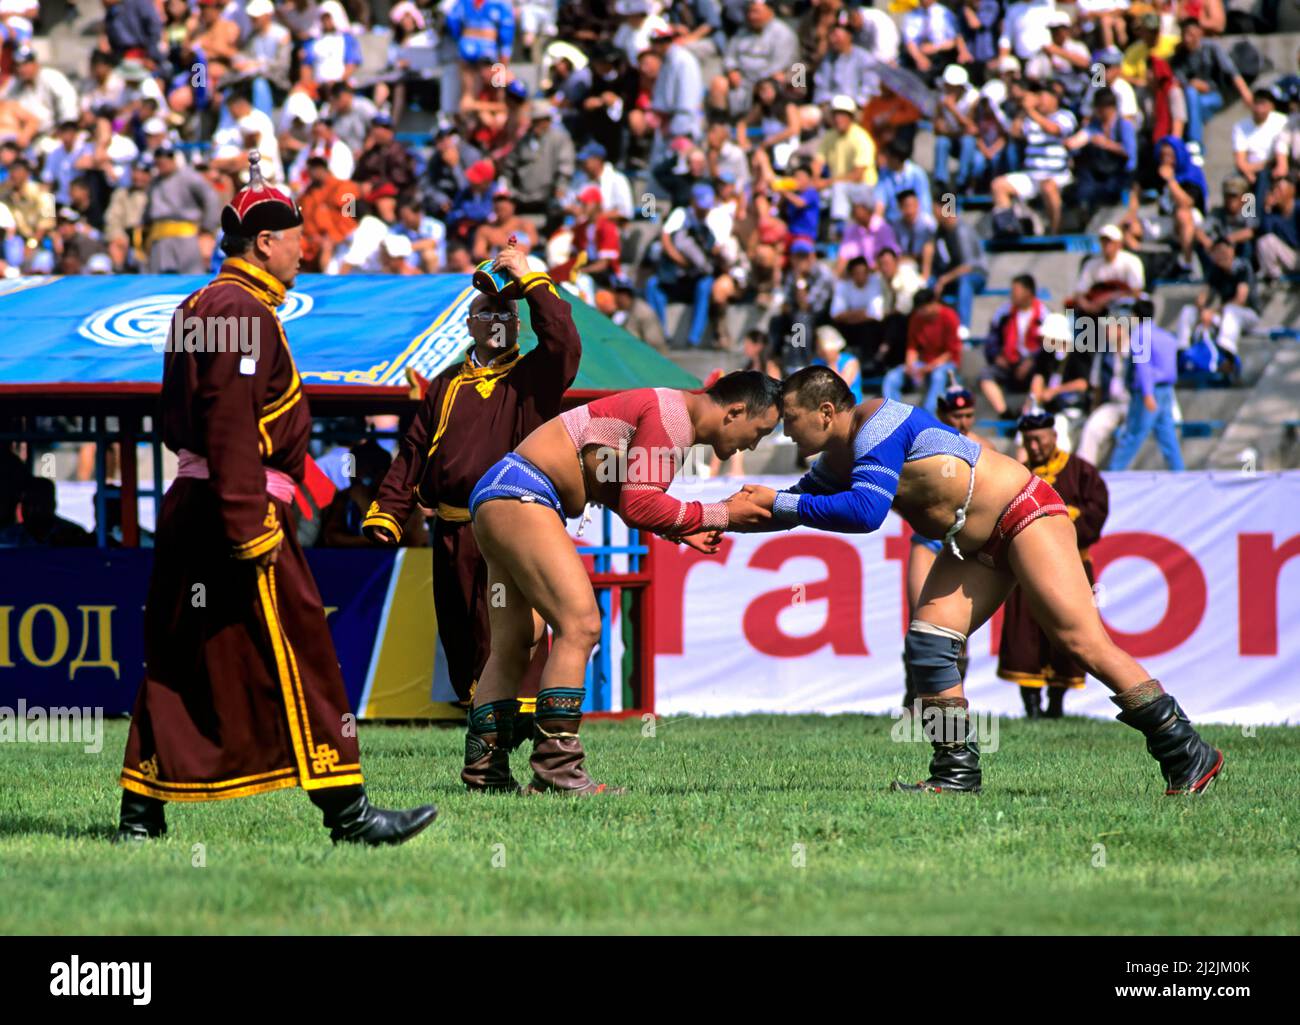 Ulaanbaatar stadium, Mongolia. Naadam is a traditional type of festival in Mongolia. Wrestling competition Stock Photo